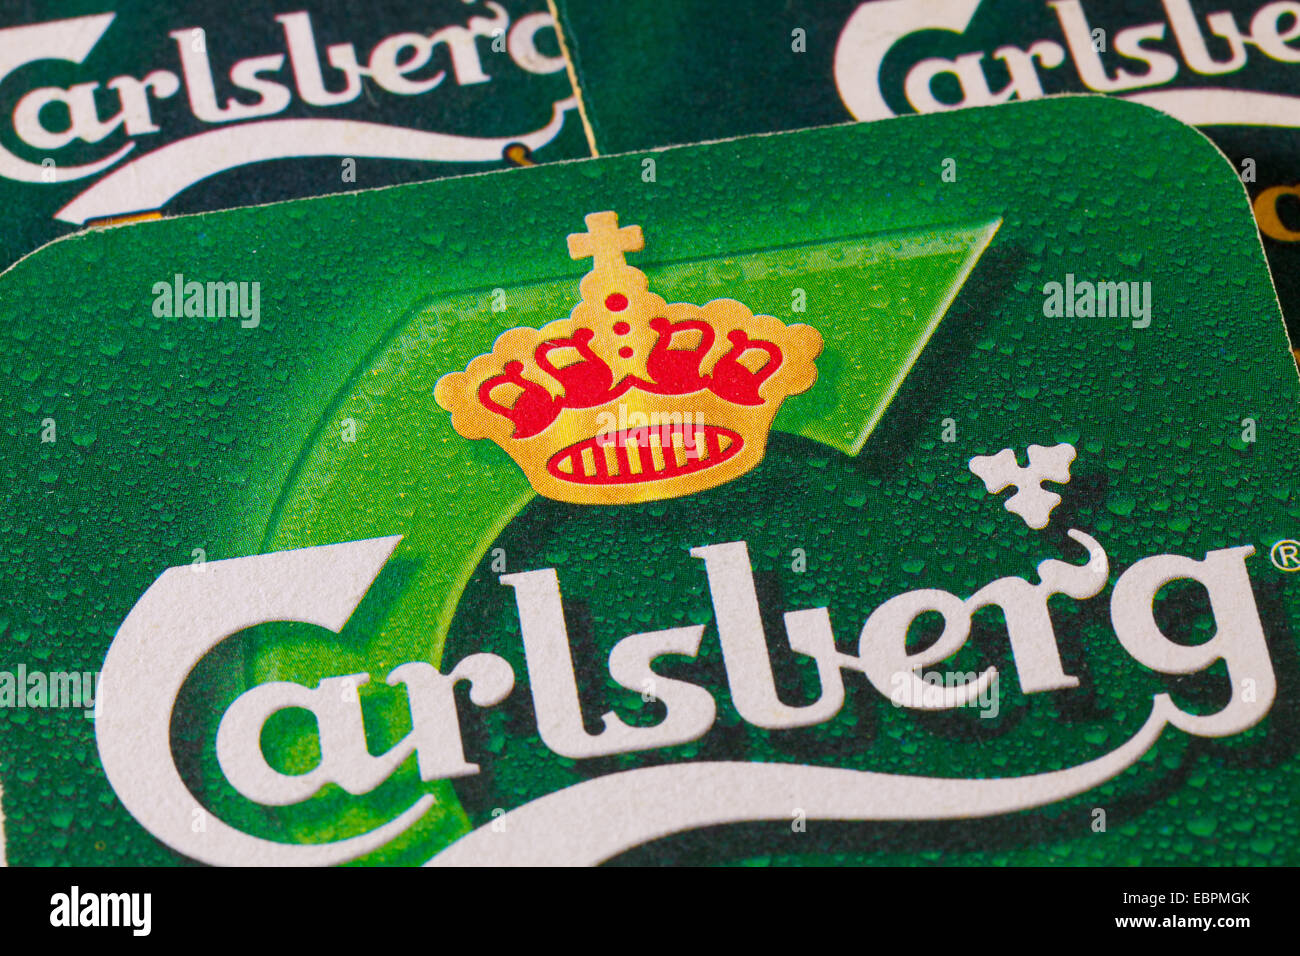 ENGLAND,LONDON - November 11, 2014:The Carlsberg is a Danish brewing company founded in 1847 by J. C. Jacobsen Stock Photo